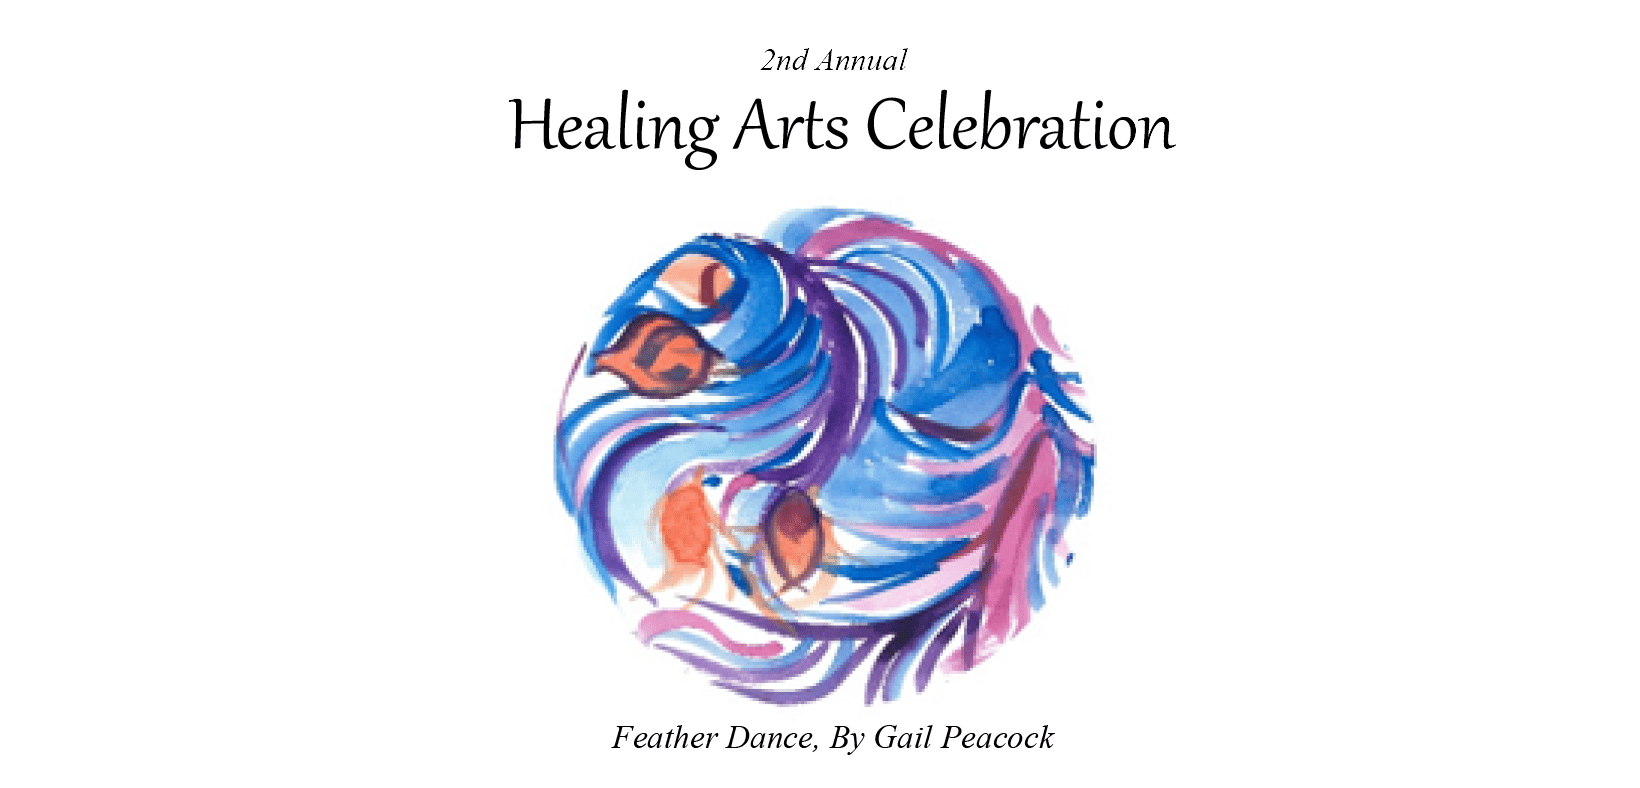 Healing Arts_event logo possibly use for article